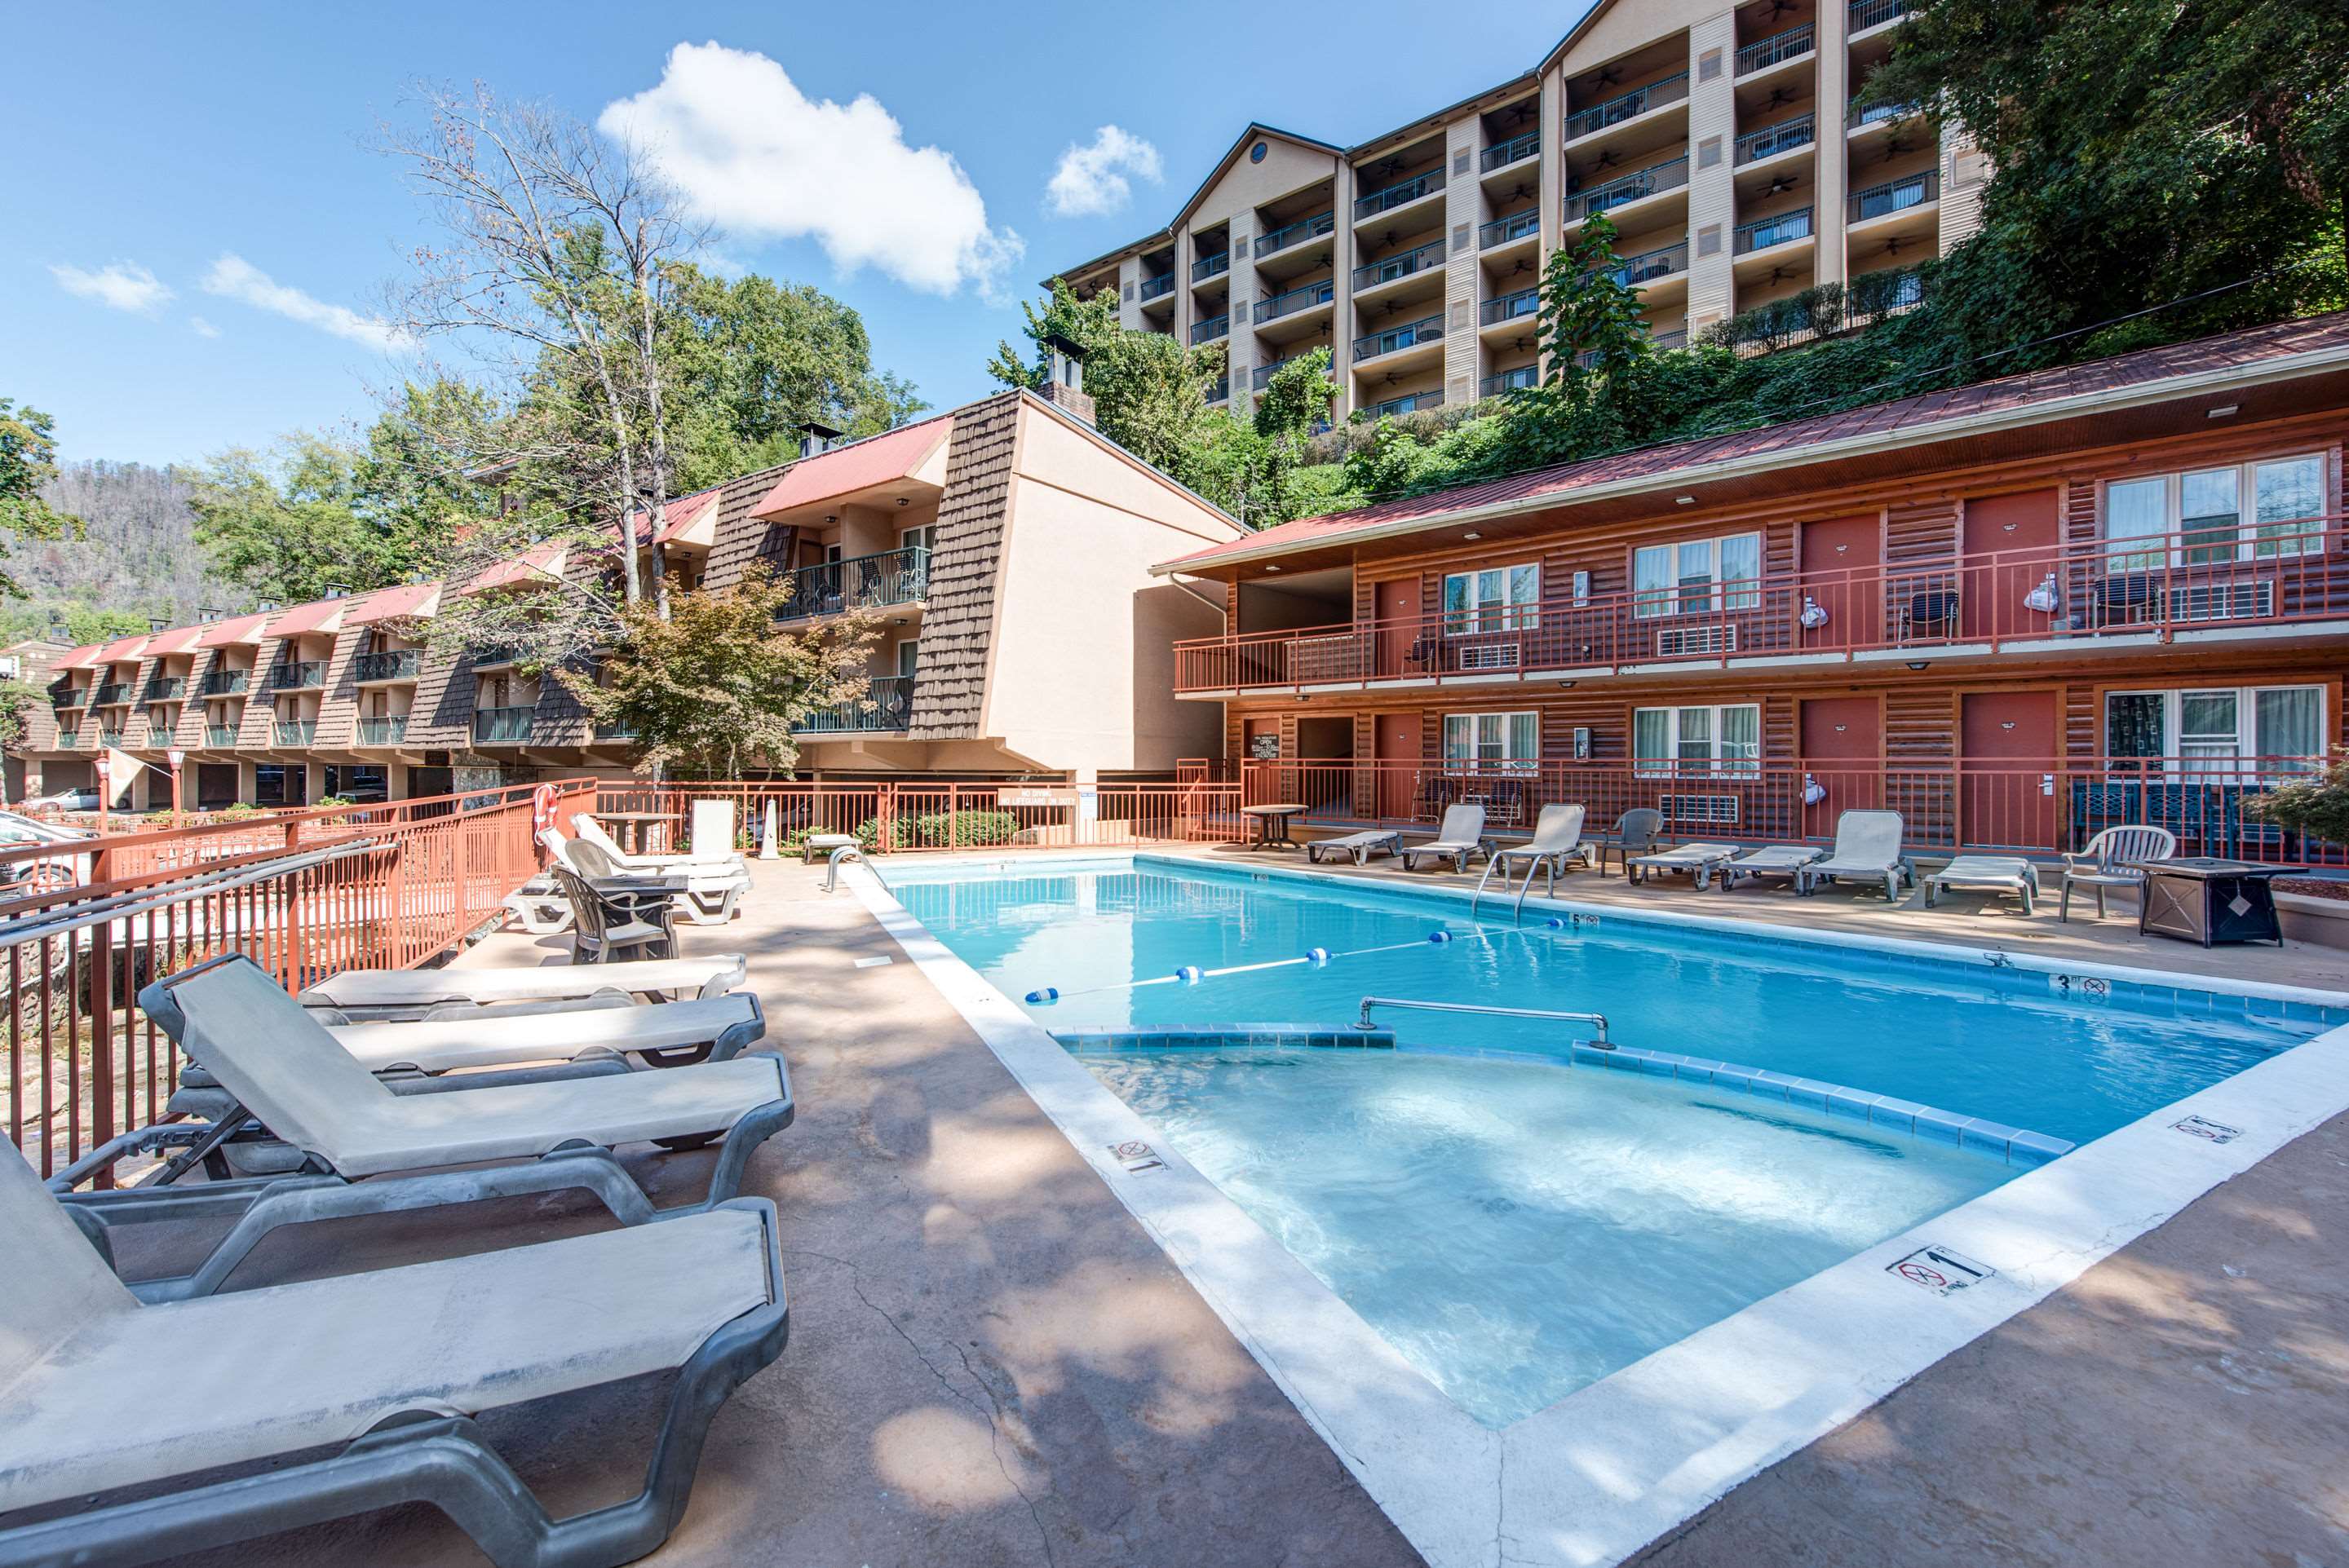 Picture of a place: Quality Inn Creekside - Downtown Gatlinburg